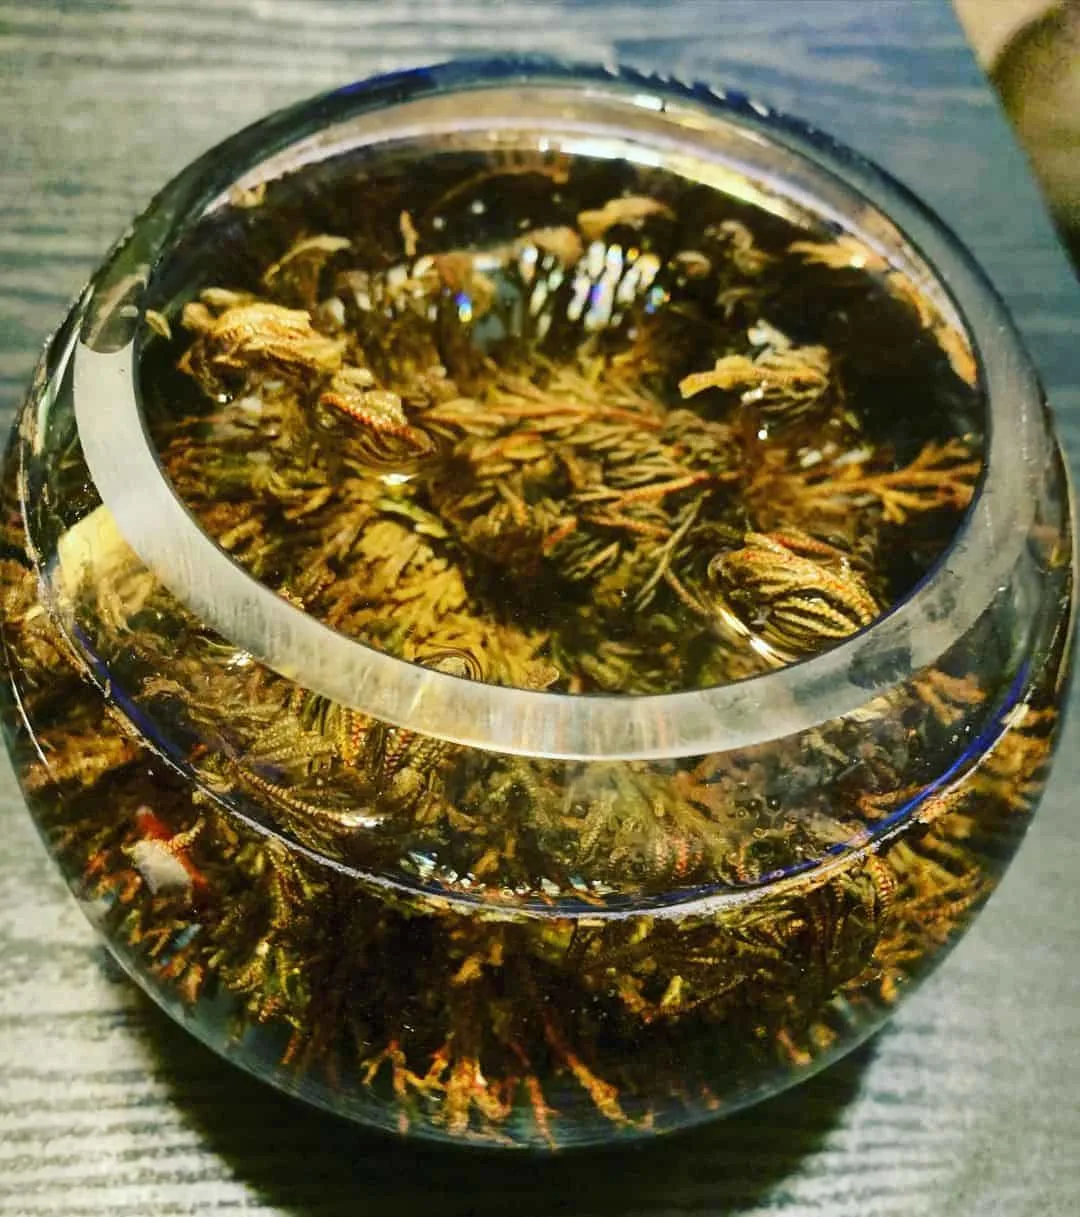 rose of Jericho in the water